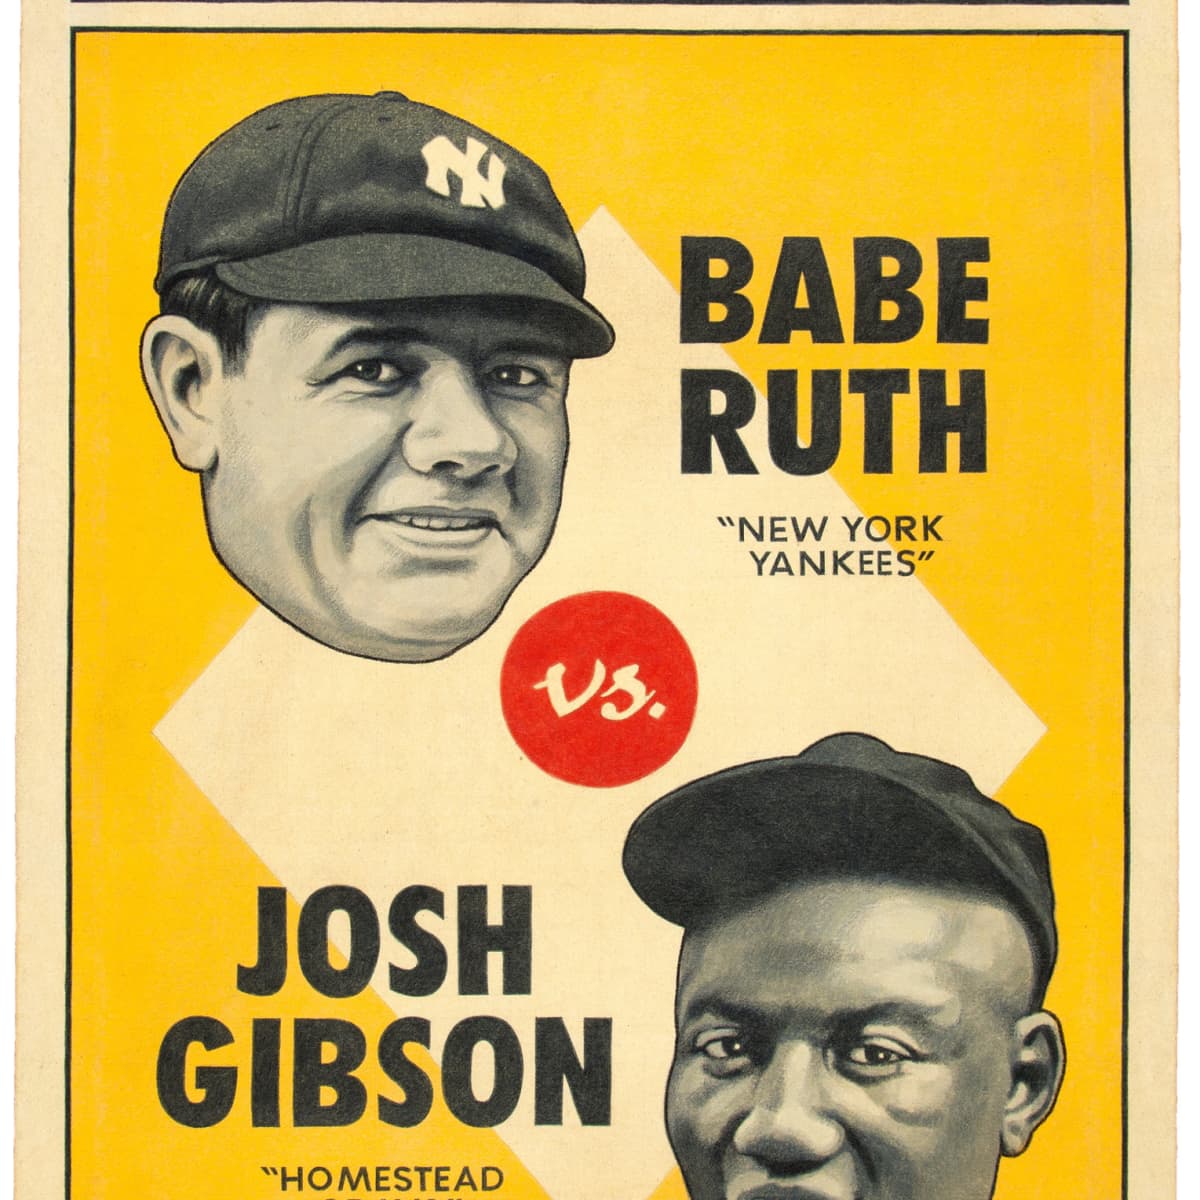 Tutoring Worksheet Number 17 Answers.pdf - Name : Josh Gibson by Guy  Belleranti Born in Georgia in 1911 Josh Gibson was often called the black  Babe